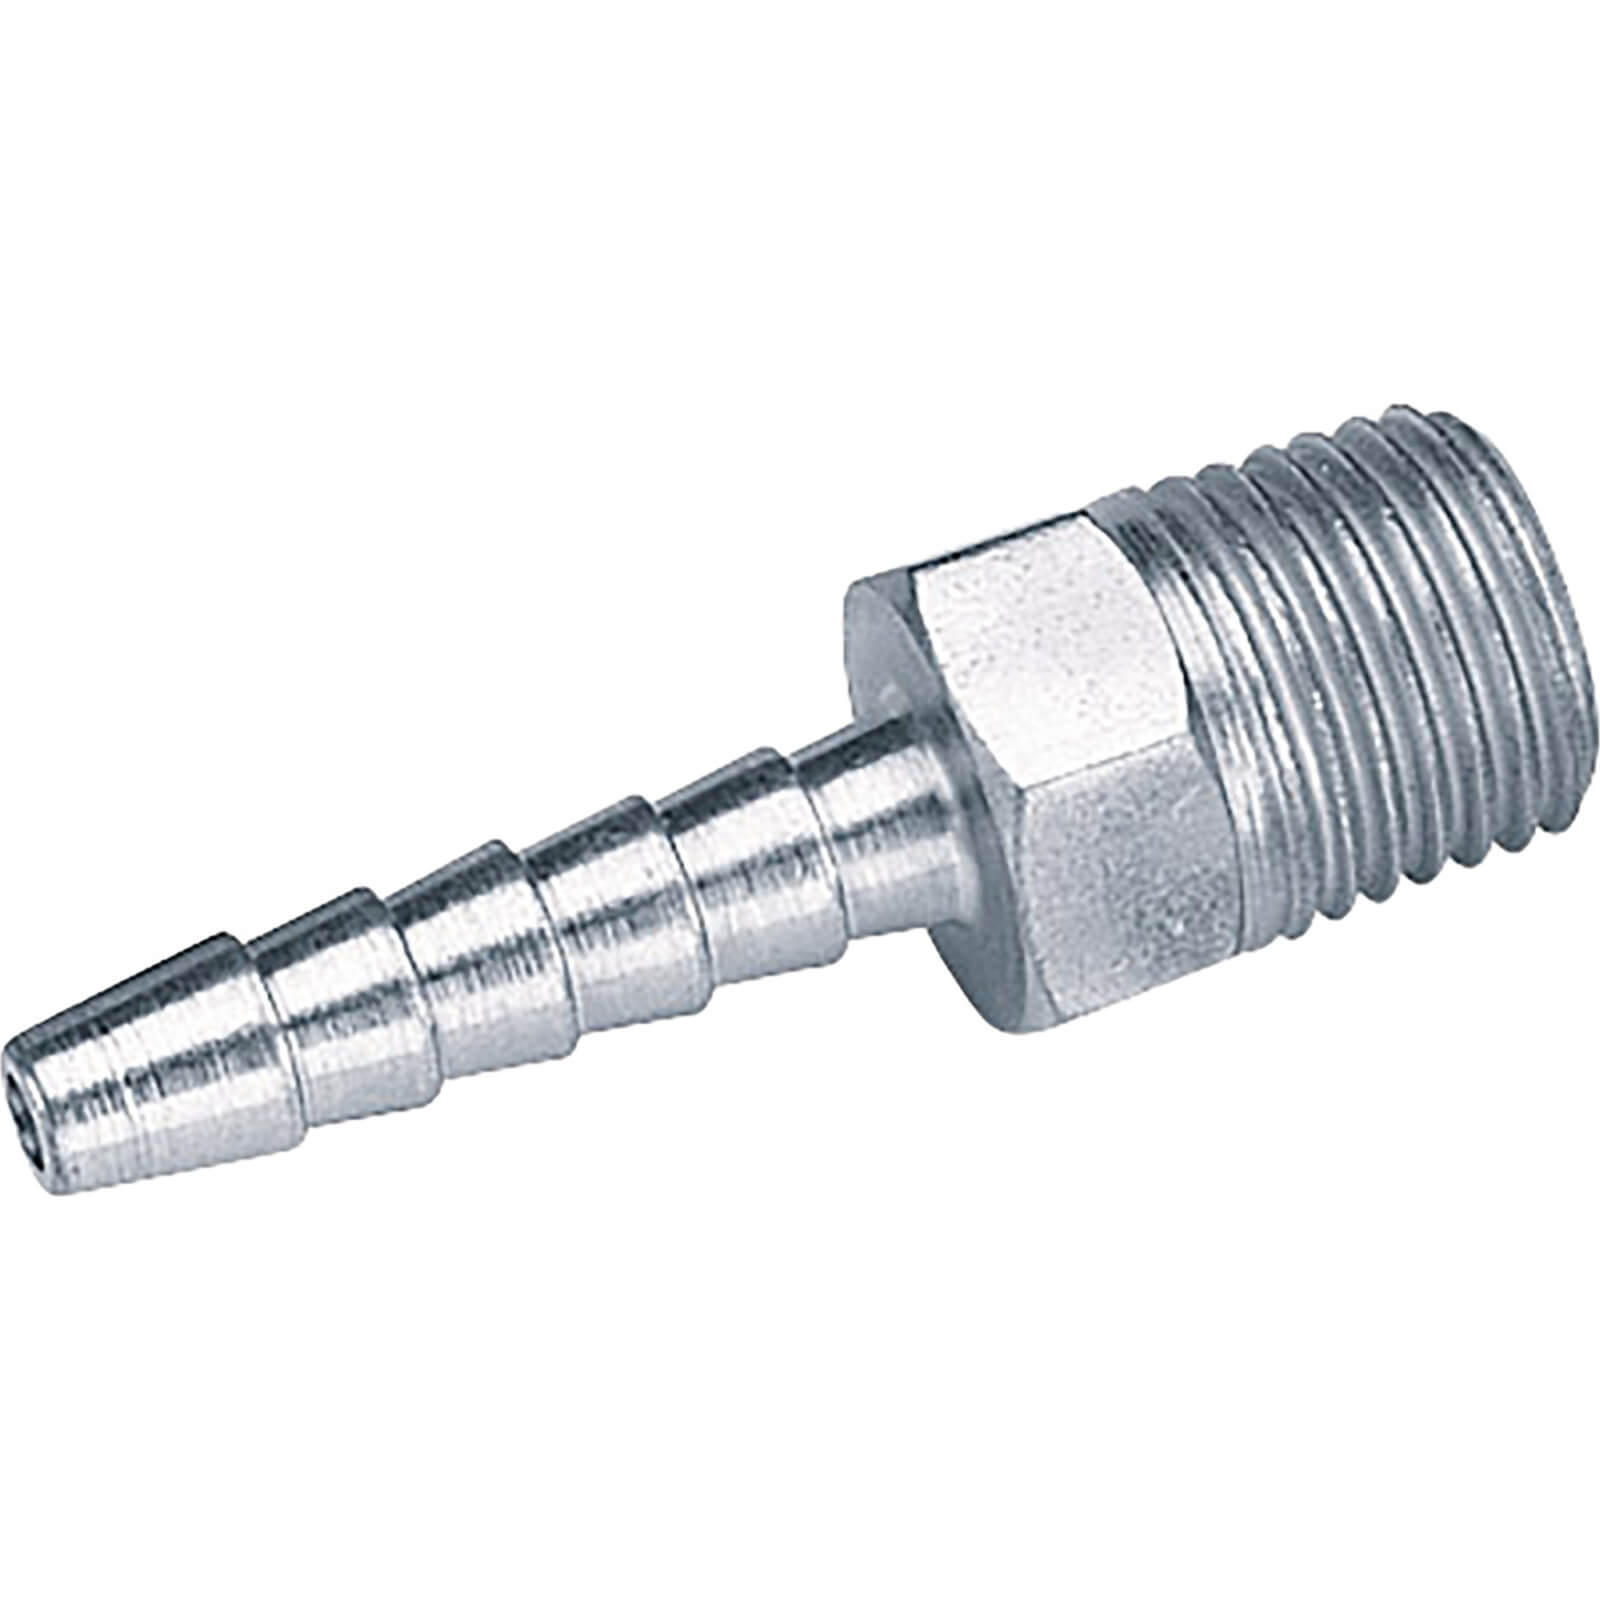 Image of Draper PCL Tailpiece Air Line Fitting BSPT Male Thread 1/4" BSP 3/16" Pack of 5